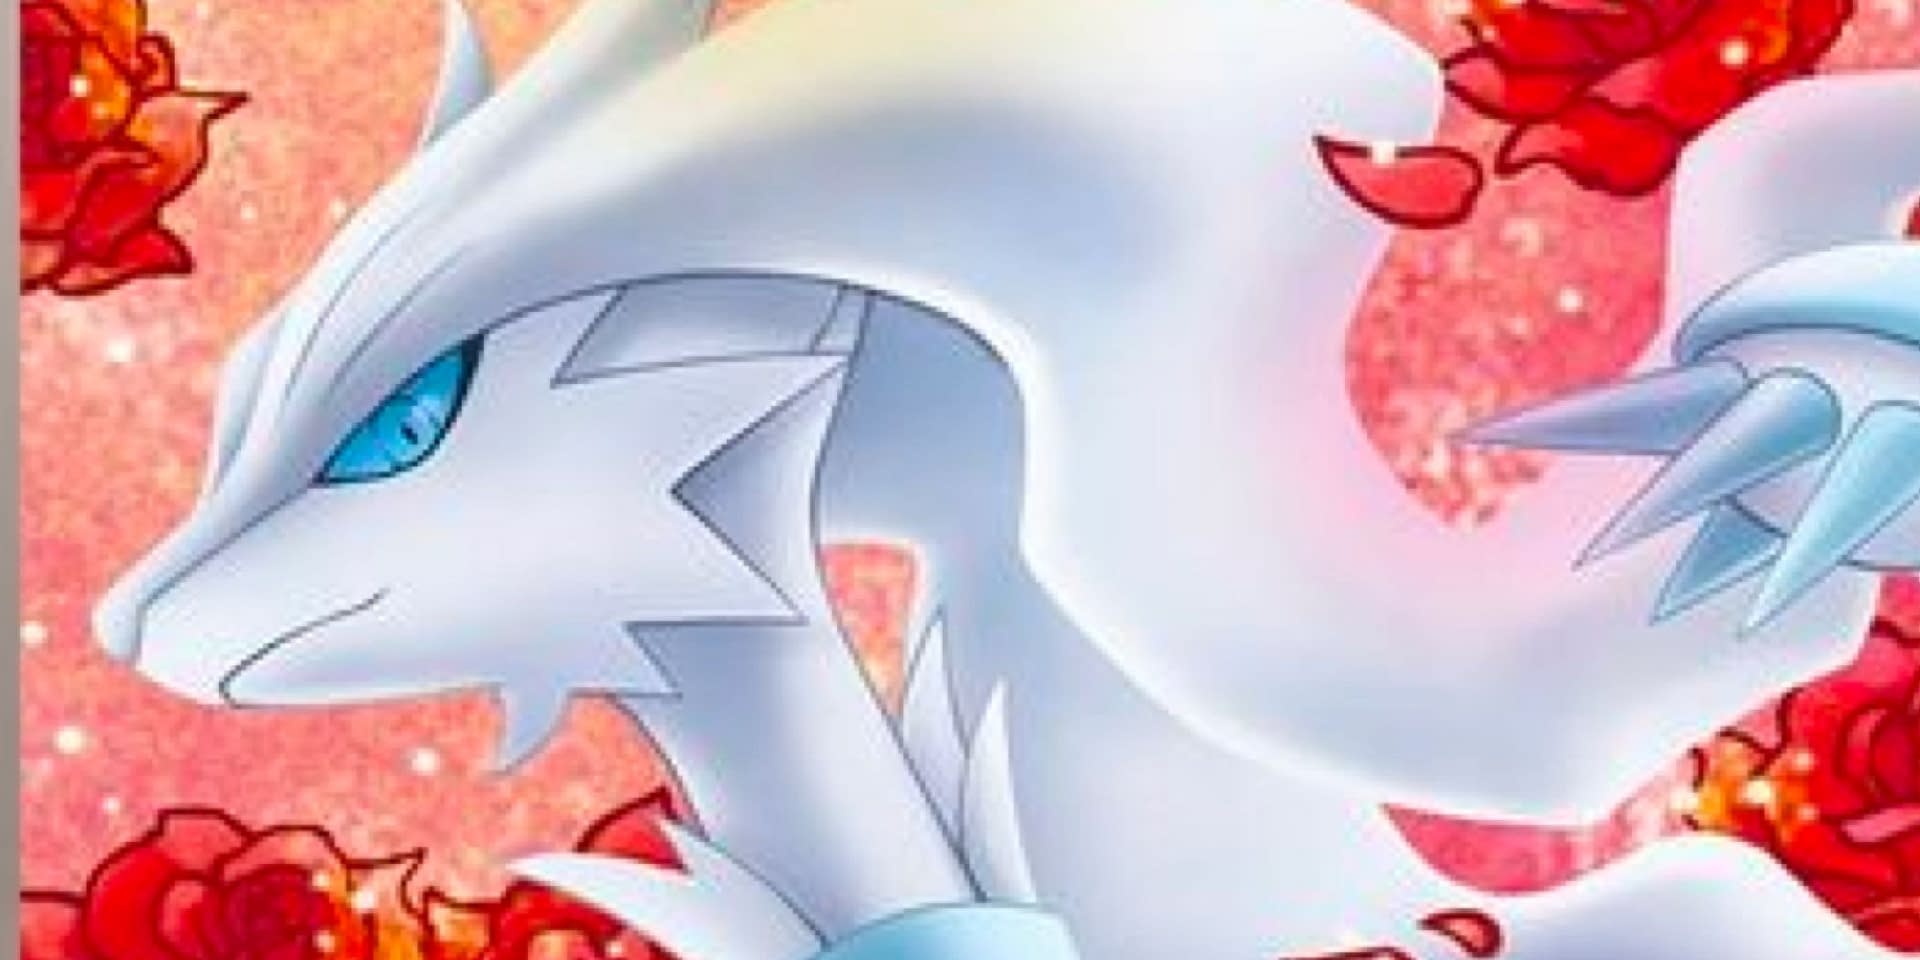 Why you should stock up on Reshiram and Zekrom in Pokemon Go - Dexerto